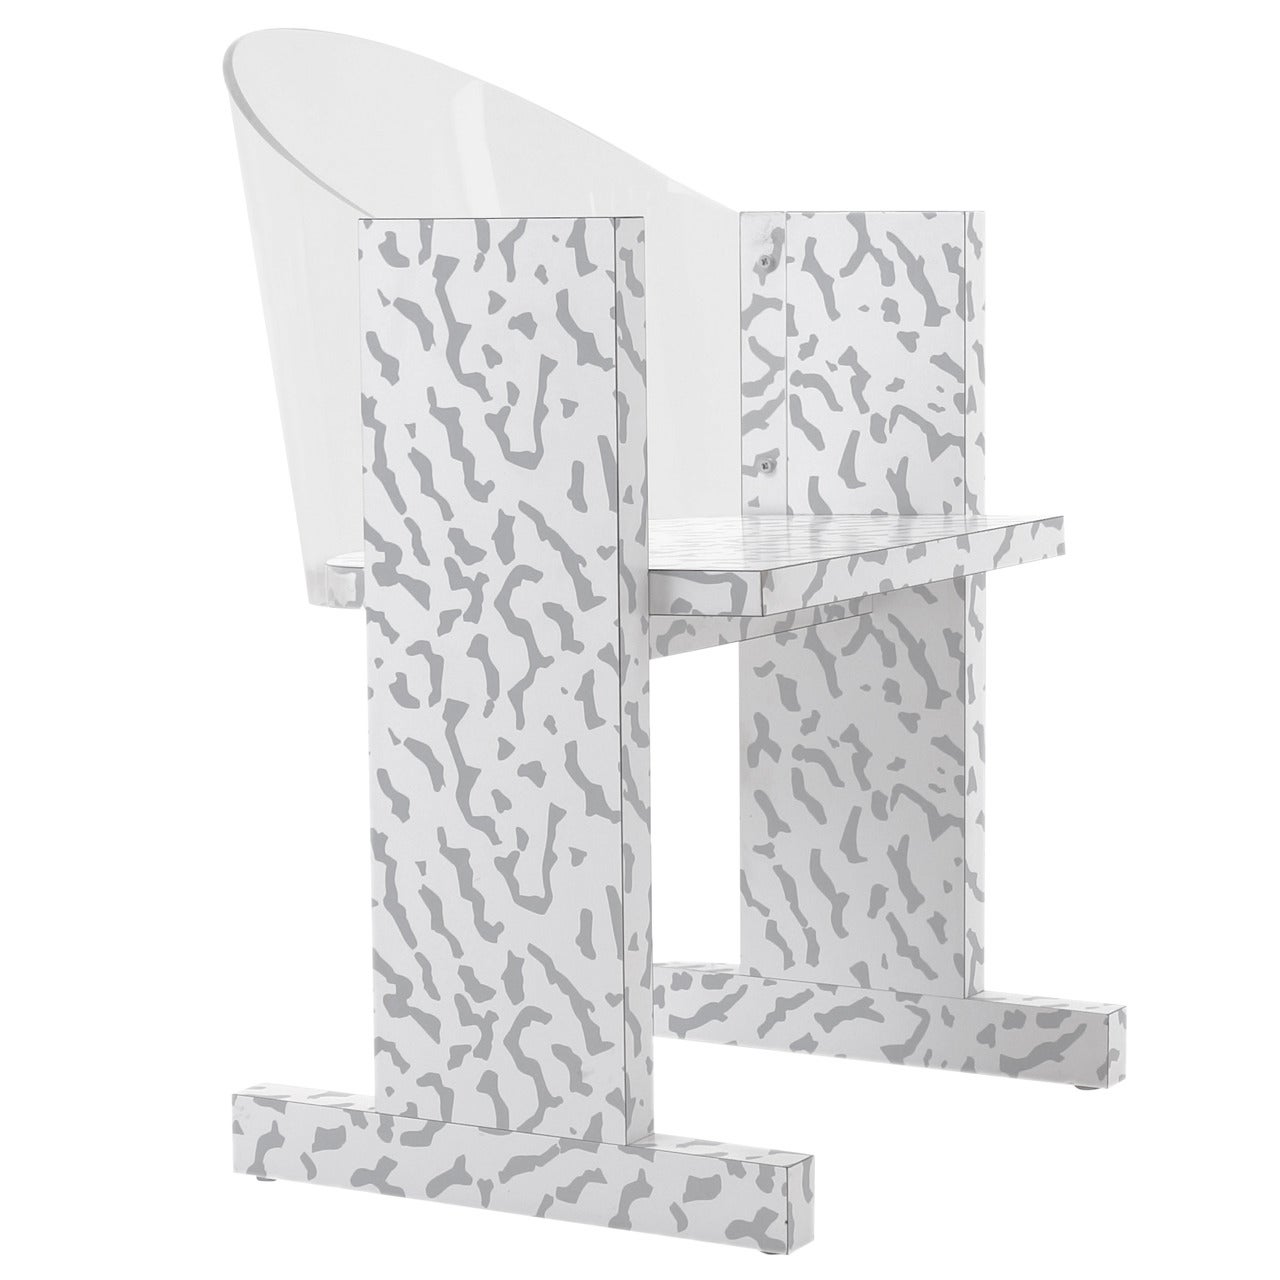 Teodora Chair by Ettore Sottsass, 1984, Vitra Editions